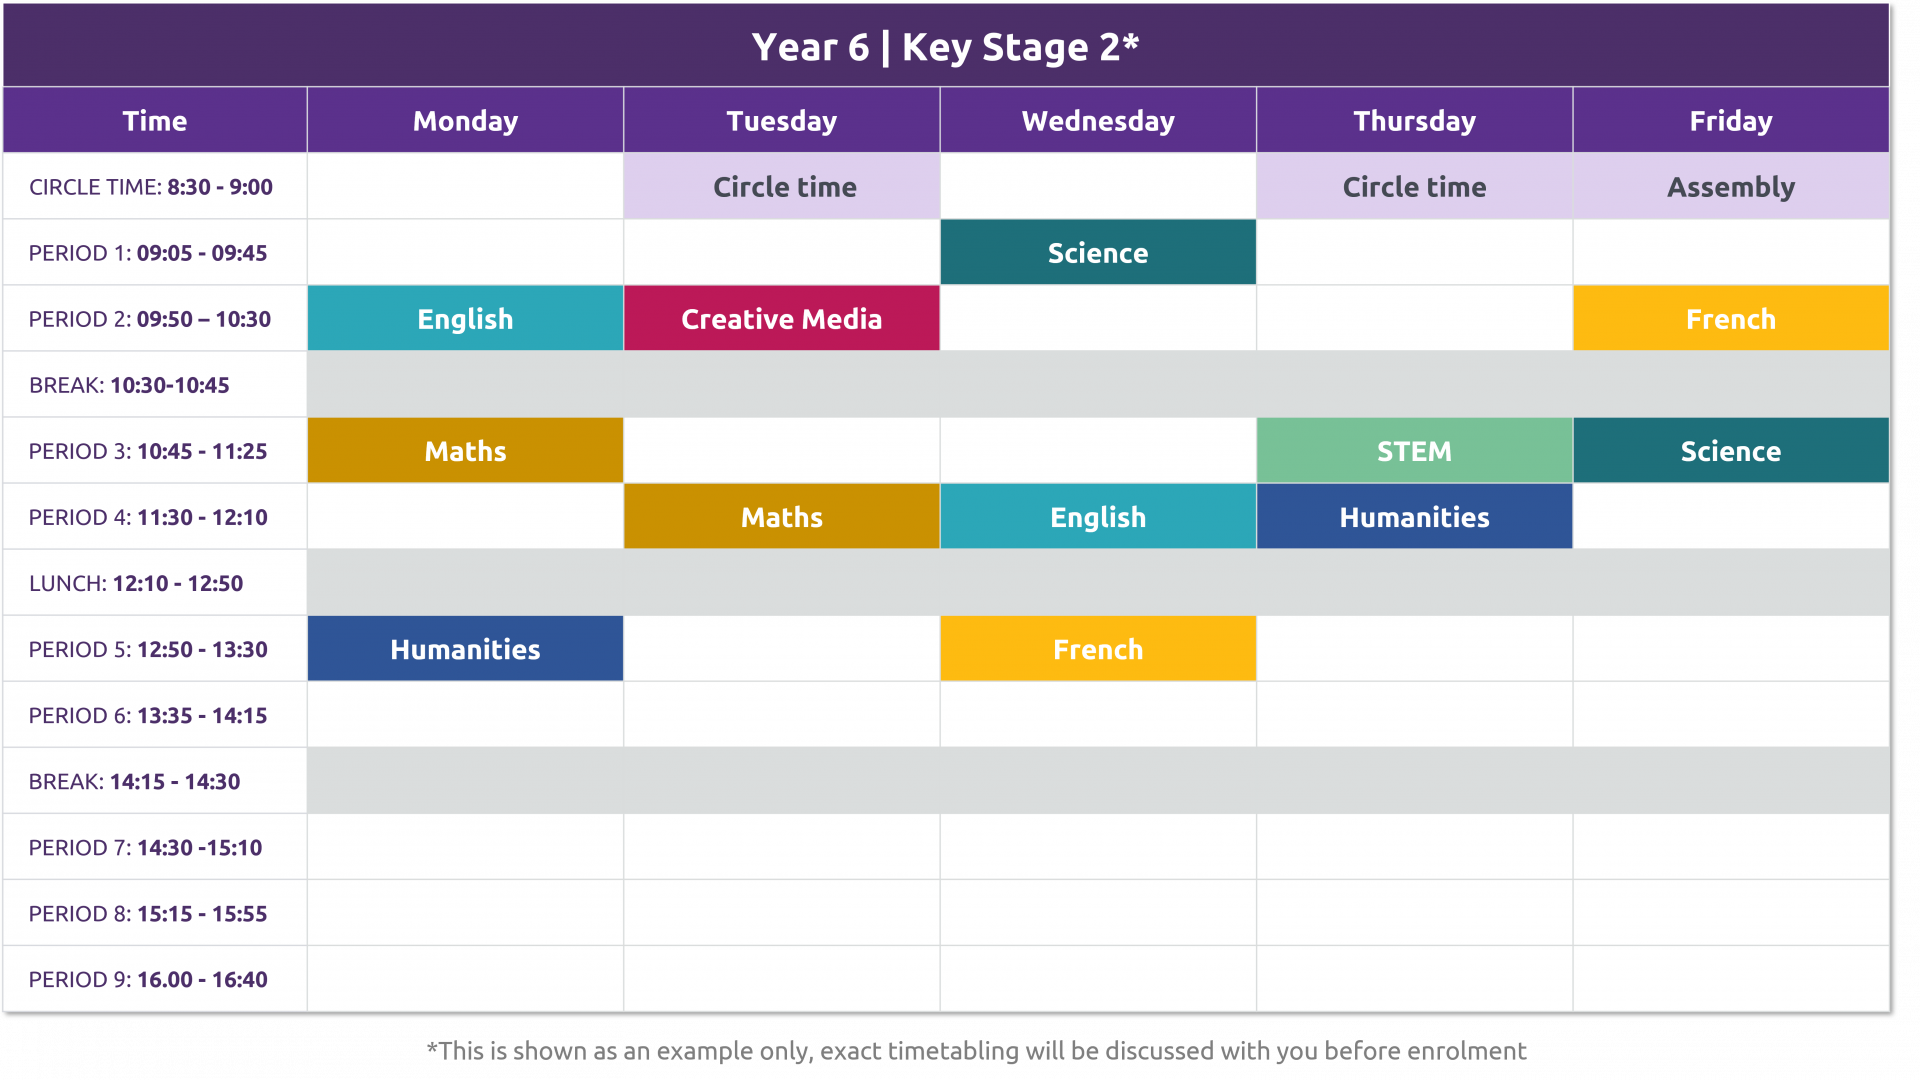 Key stage 2 timetable example